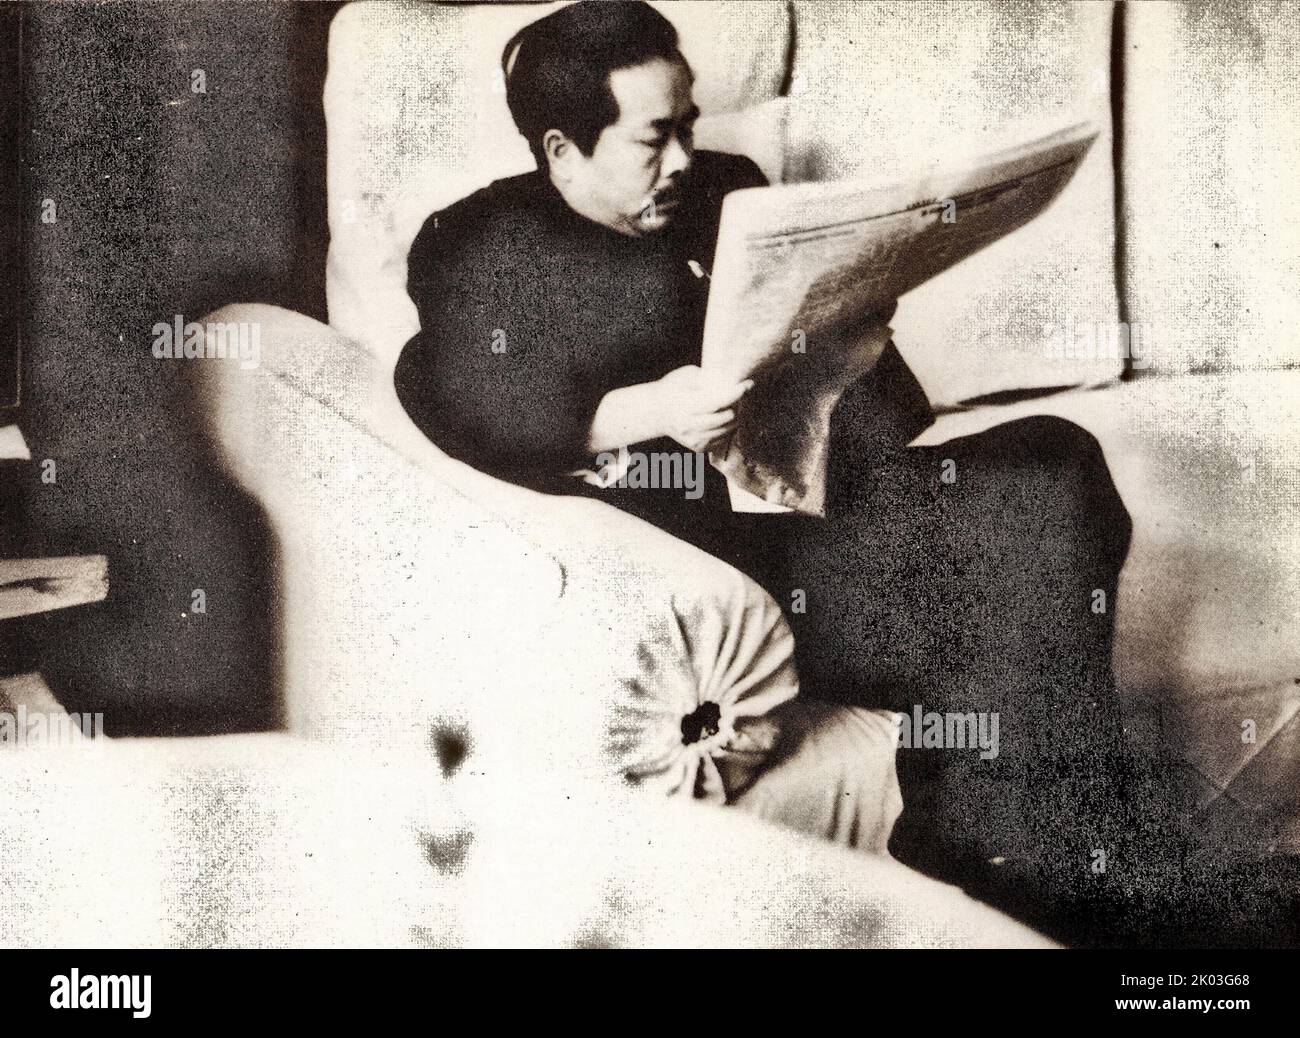 Ren Bishi reading a Soviet newspaper. Ren Bishi was a military and political leader in the early Chinese Communist Party, In the early 1930. Stock Photo